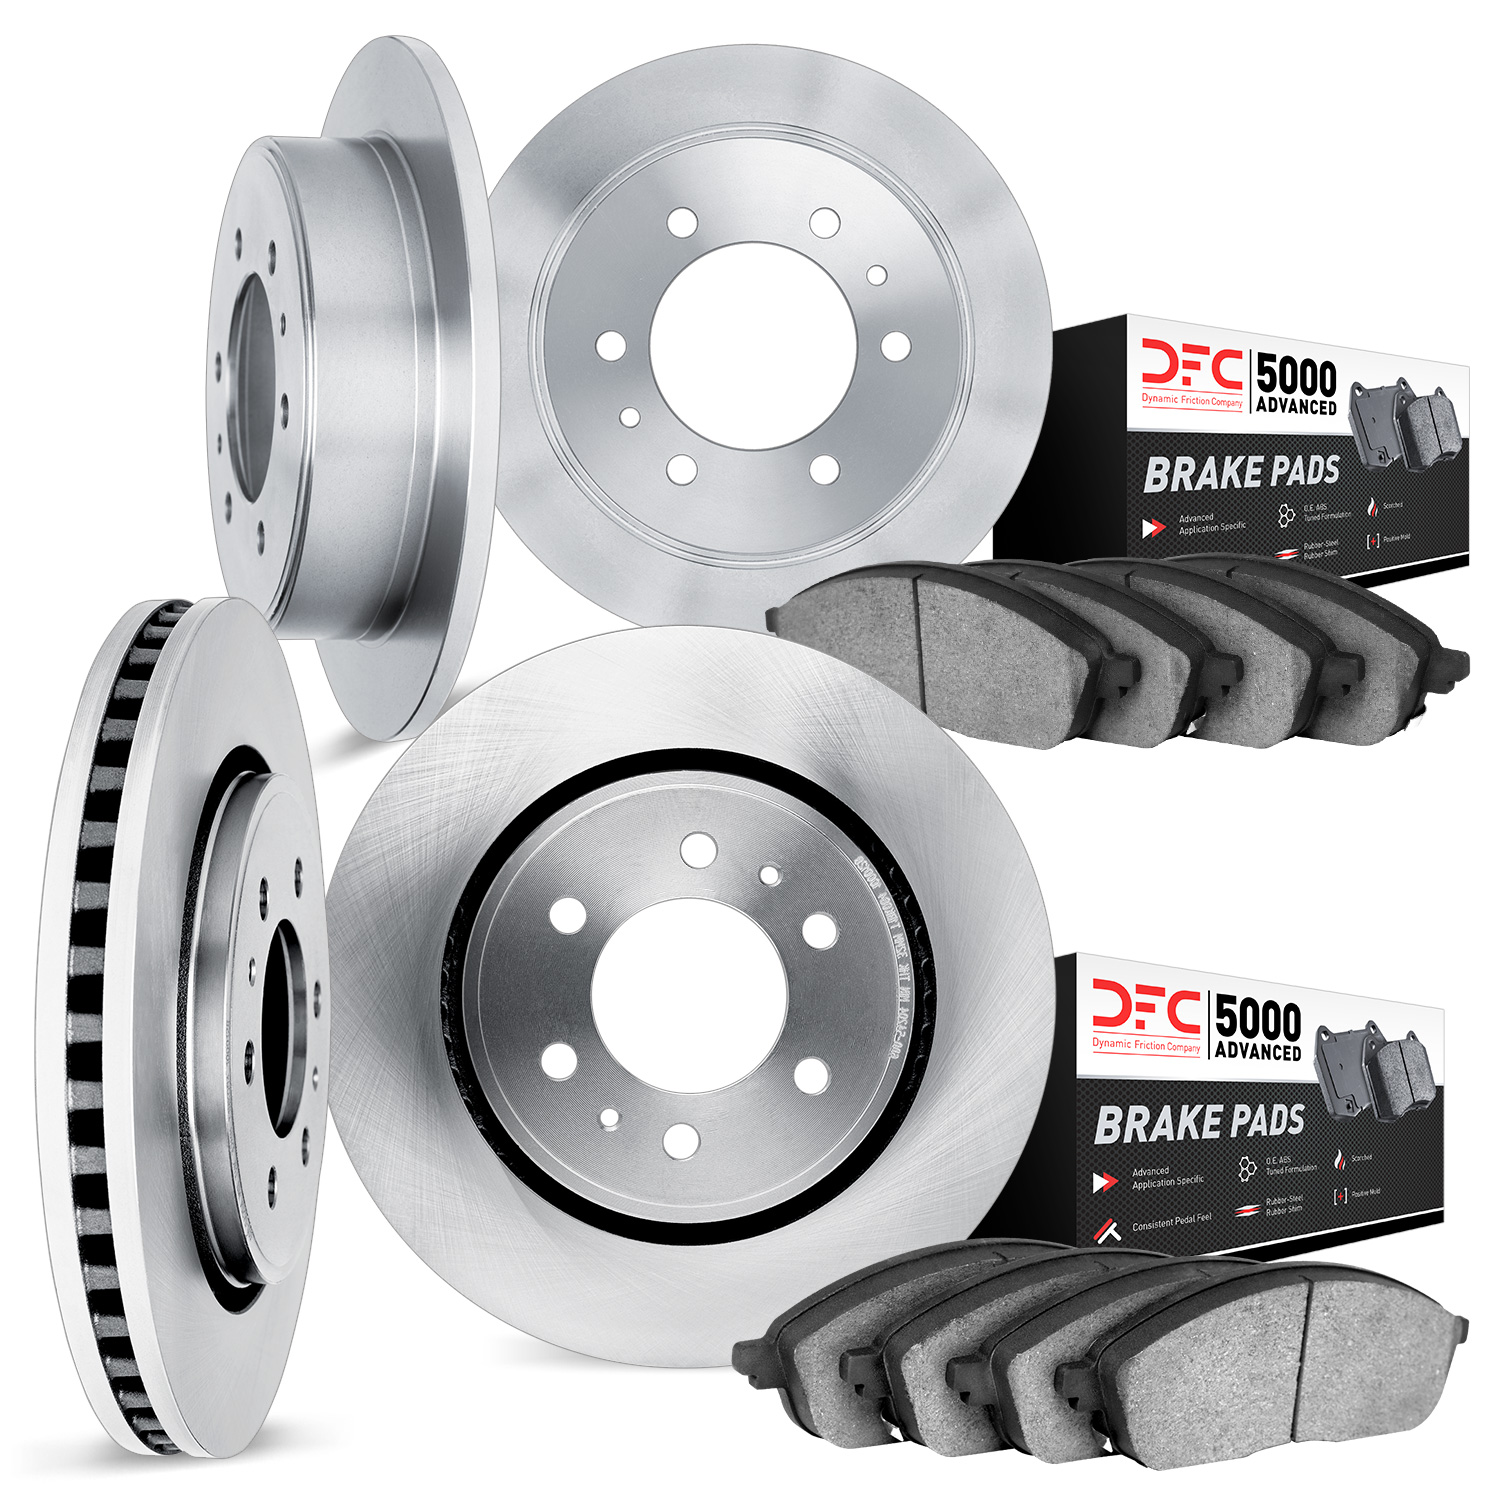 6504-55155 Brake Rotors w/5000 Advanced Brake Pads Kit, Fits Select Ford/Lincoln/Mercury/Mazda, Position: Front and Rear